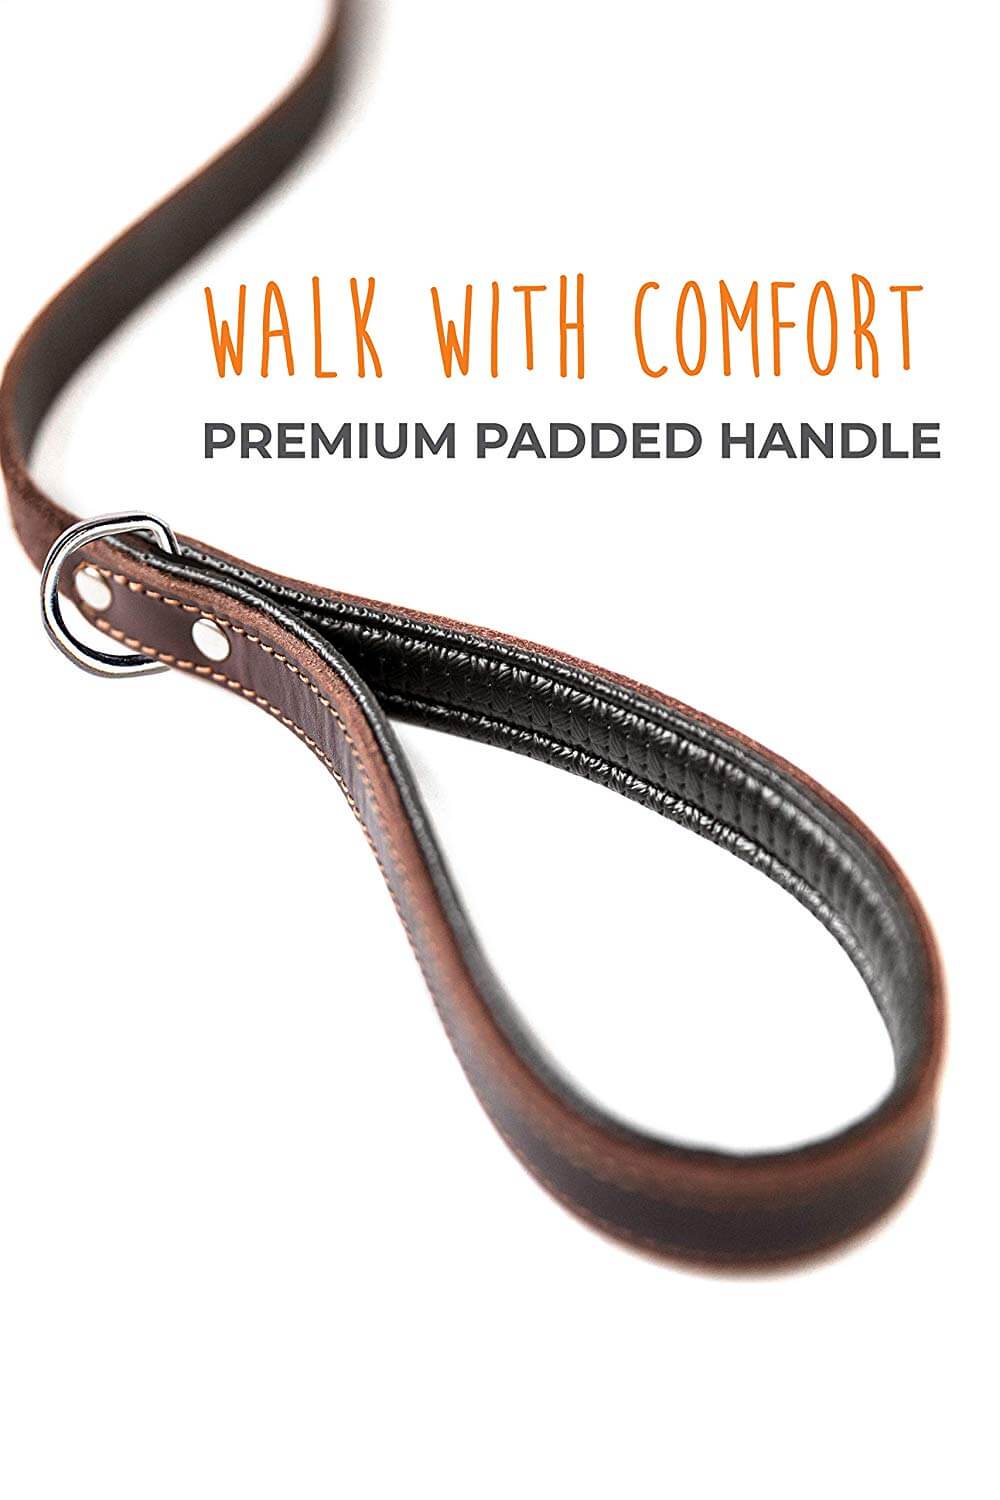 6-Foot Leather Dog Leash - Padded Handle & Carabiner Clip